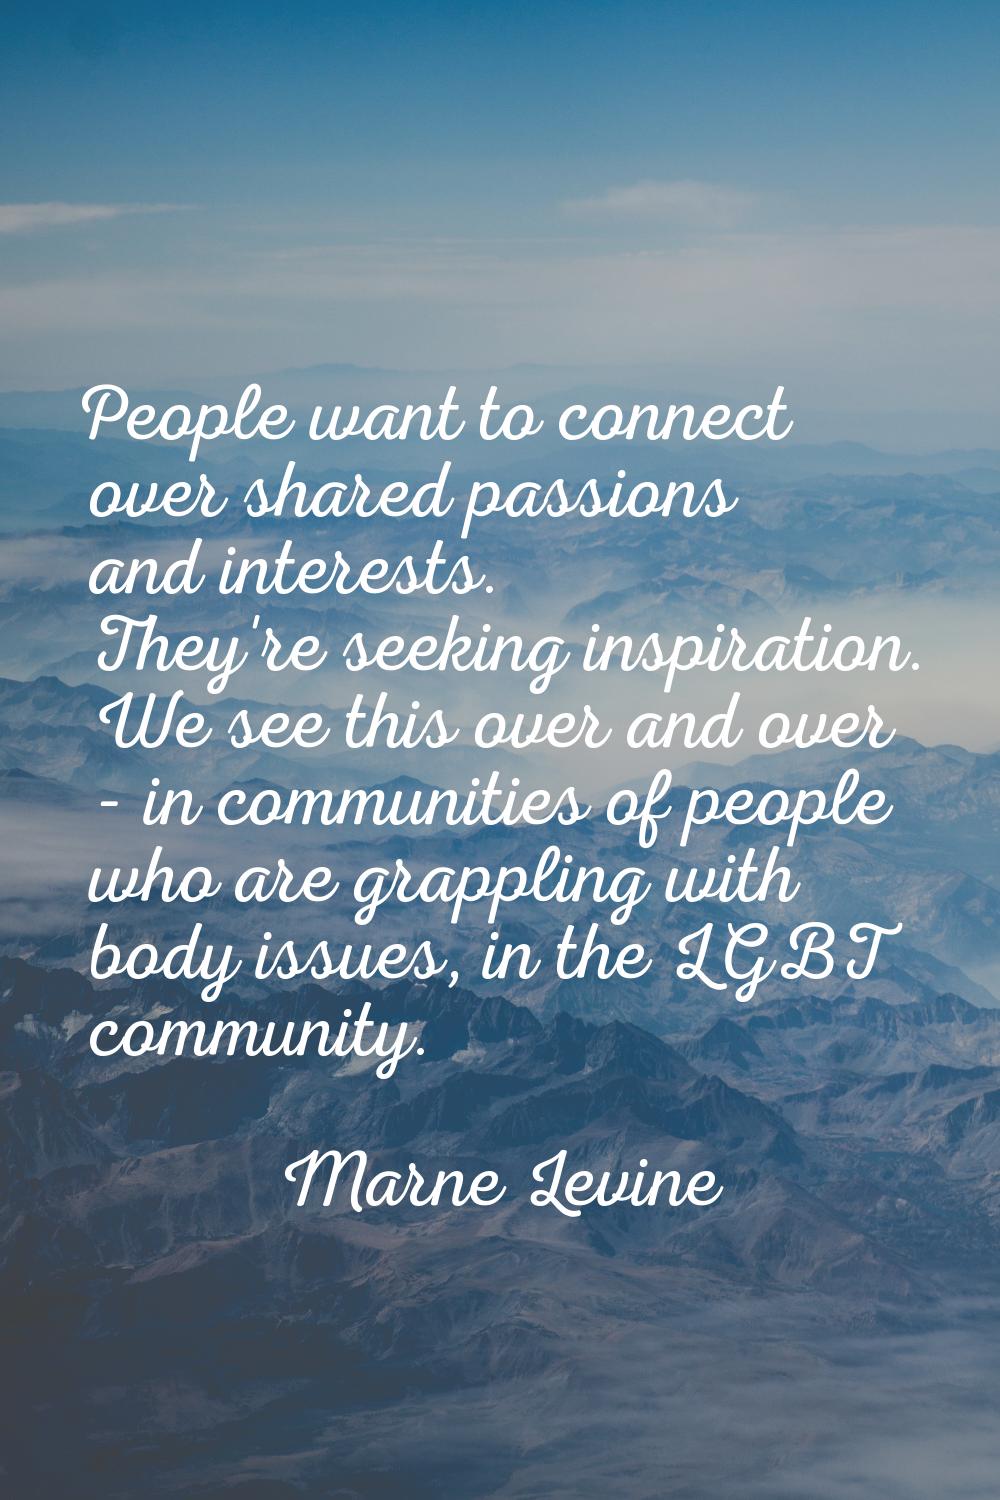 People want to connect over shared passions and interests. They're seeking inspiration. We see this